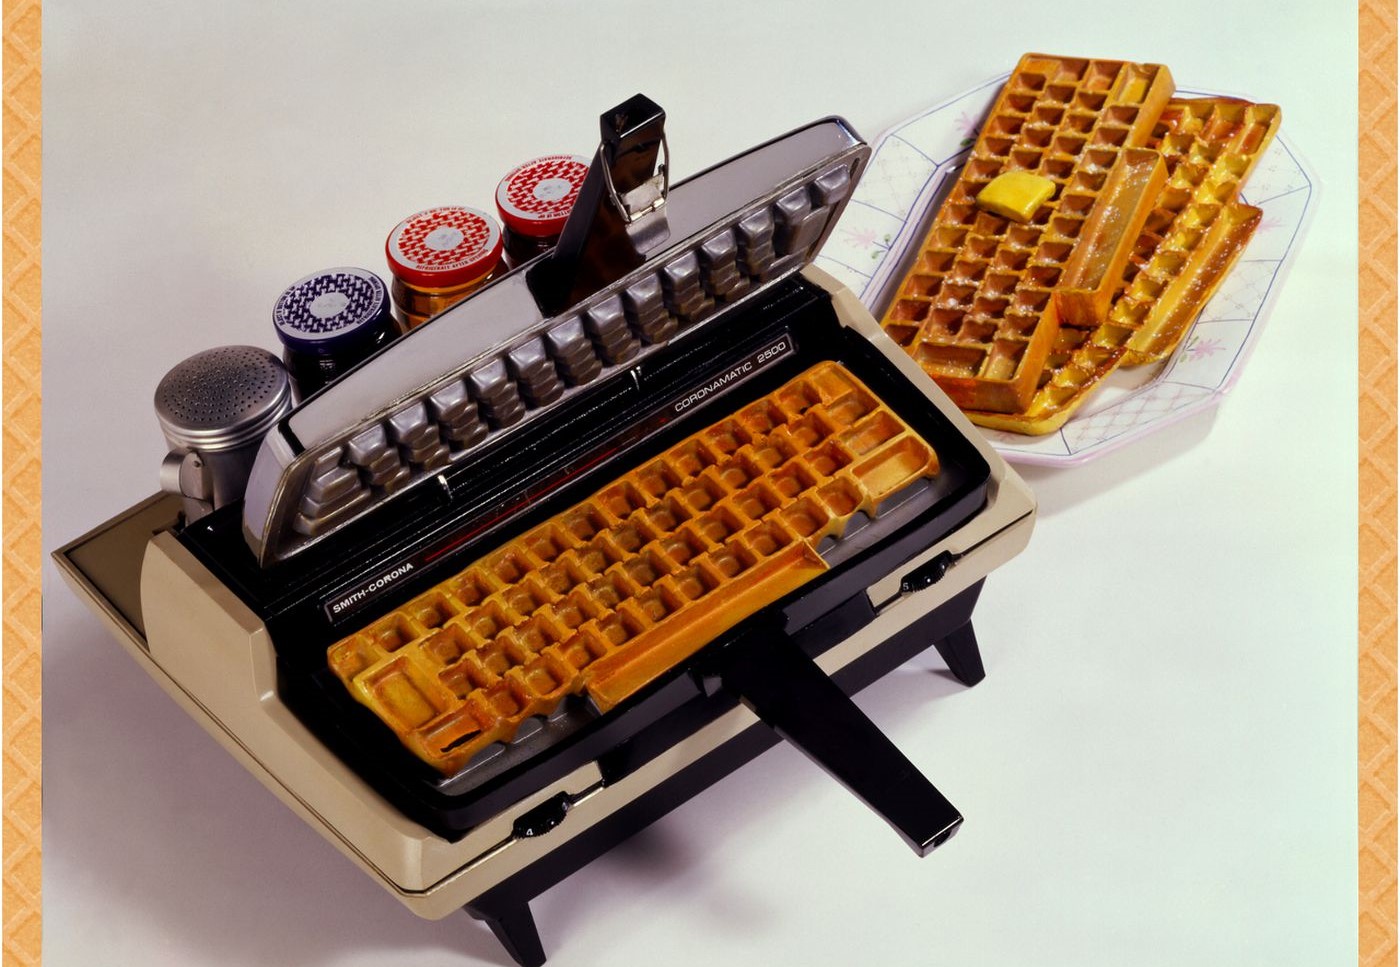 https://storables.com/wp-content/uploads/2023/08/how-i-built-this-podcast-keyboard-waffle-iron-1692243186.jpg